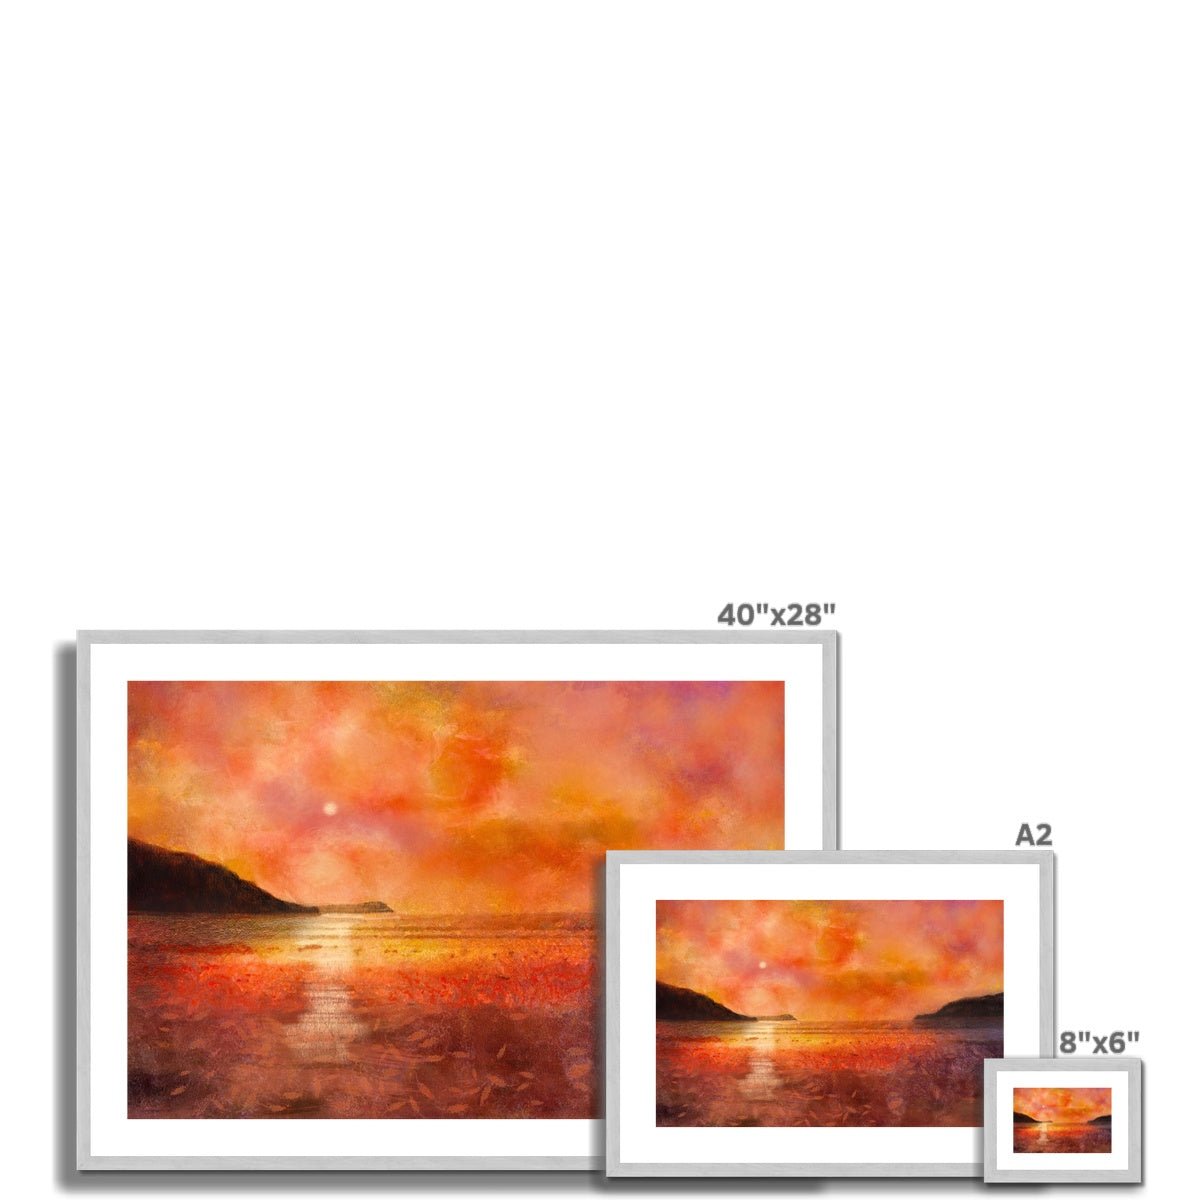 Calgary Beach Sunset Mull Painting | Antique Framed & Mounted Prints From Scotland-Antique Framed & Mounted Prints-Hebridean Islands Art Gallery-Paintings, Prints, Homeware, Art Gifts From Scotland By Scottish Artist Kevin Hunter